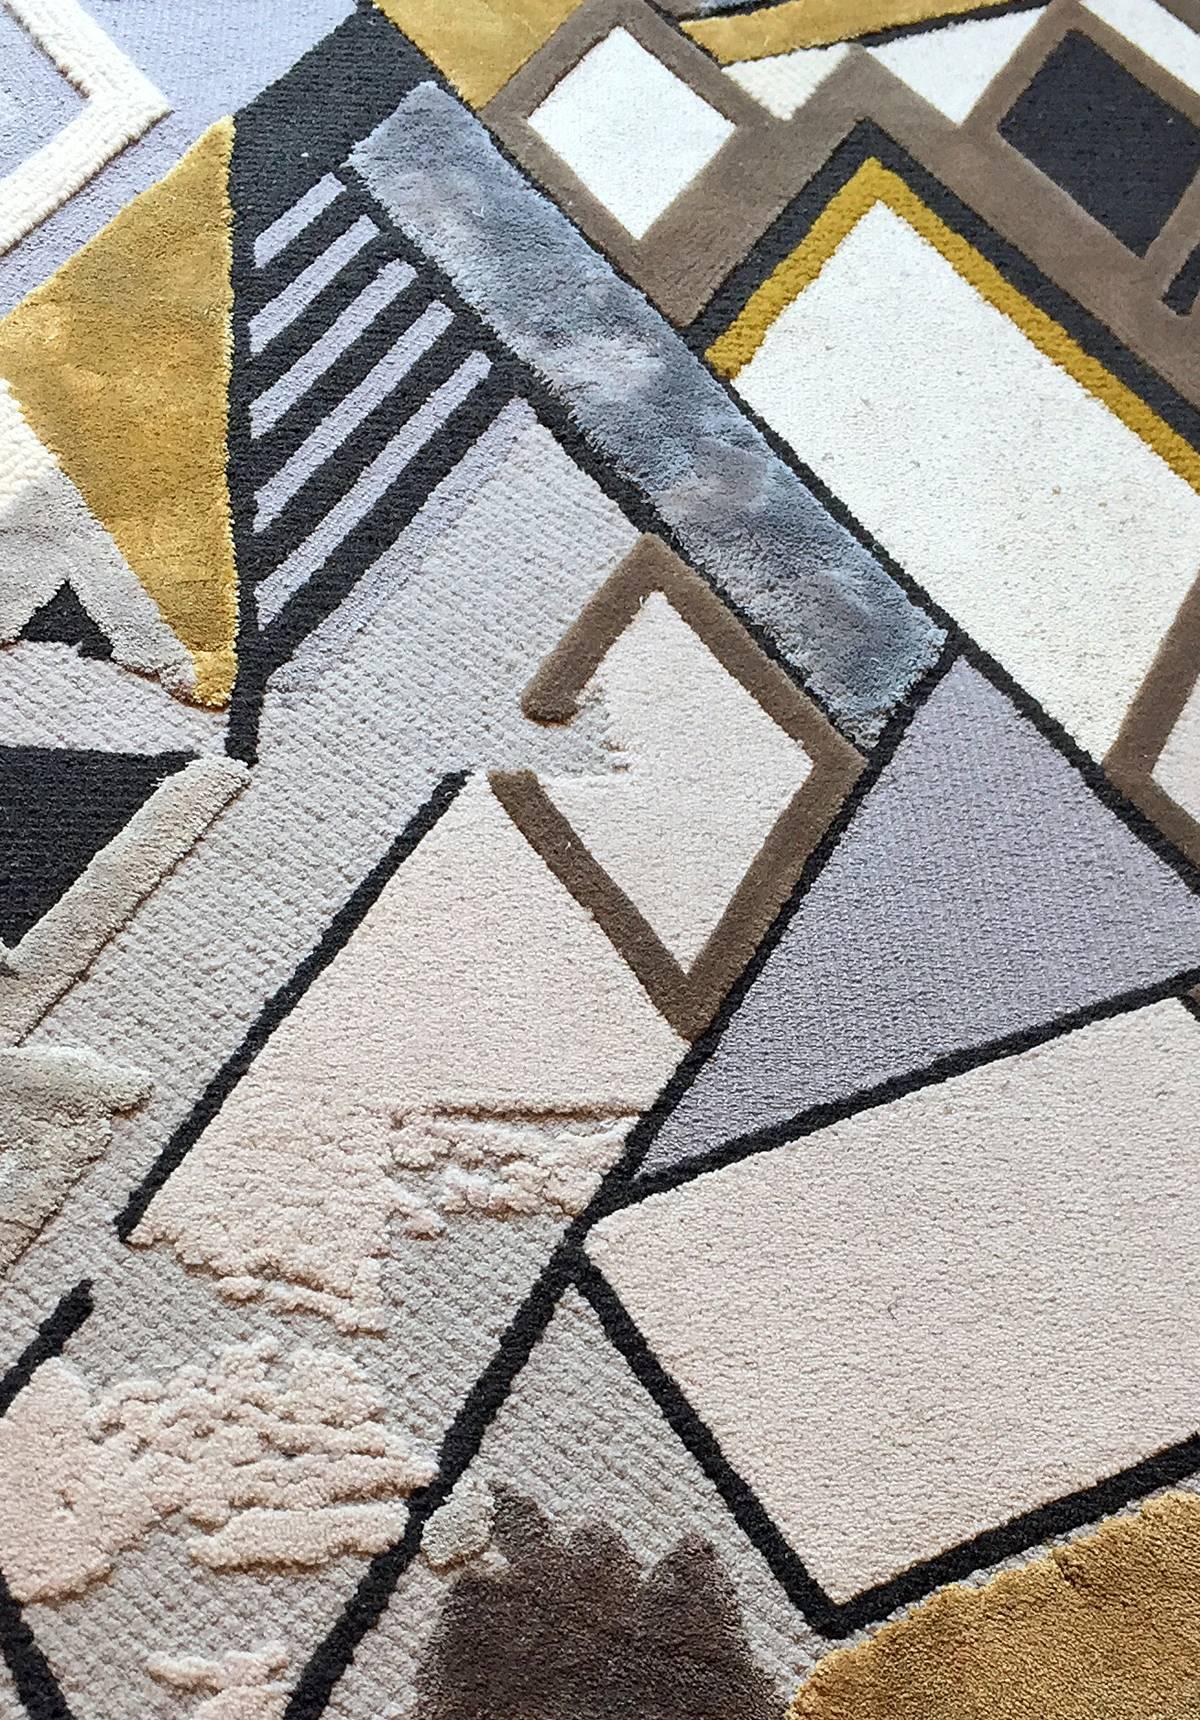 Geometric Rug by Birgit Israel, Limited Edition In Excellent Condition For Sale In London, GB